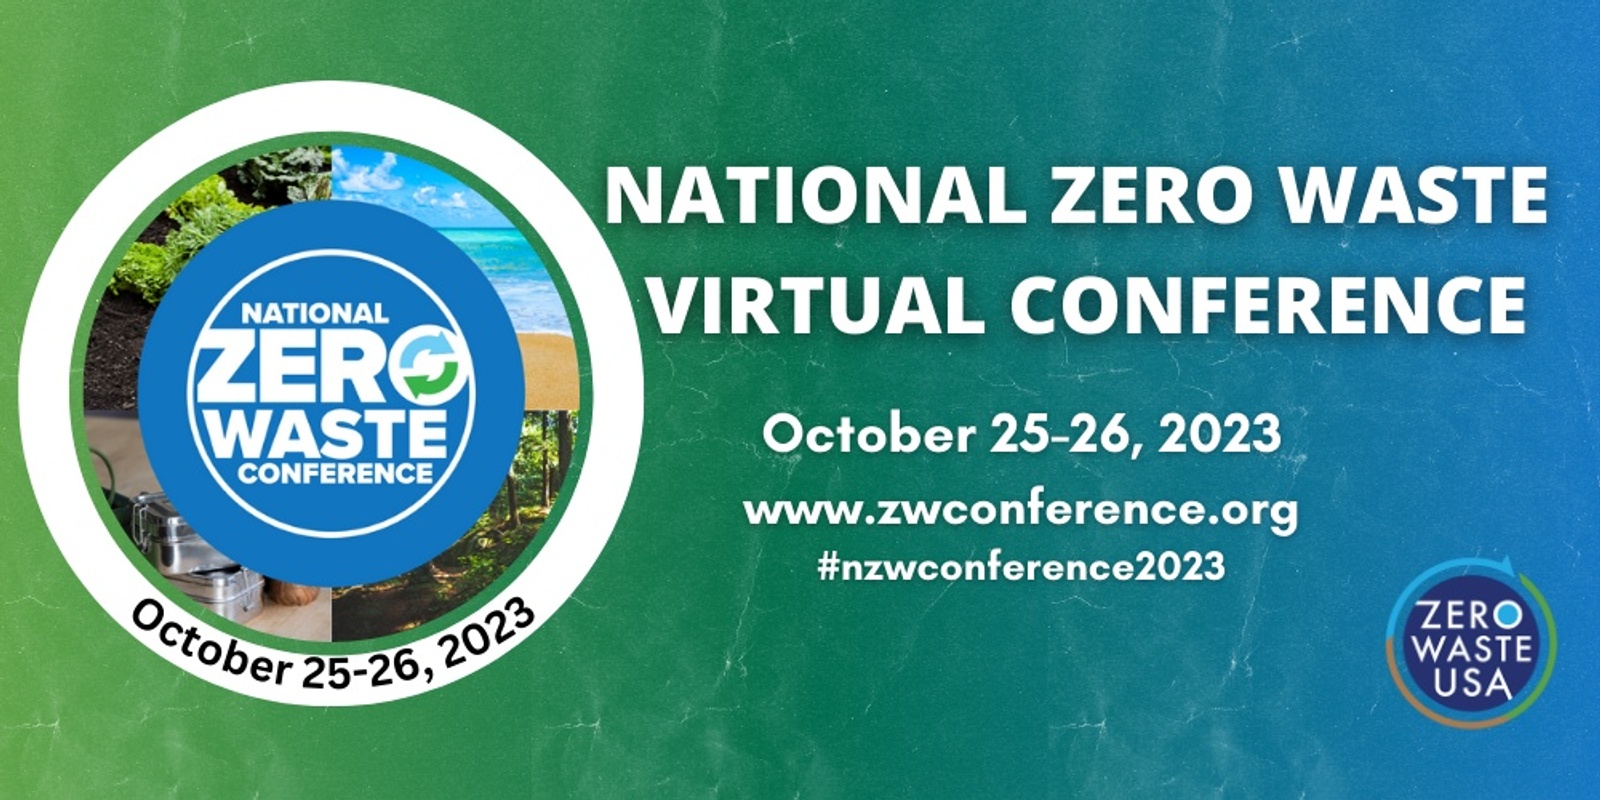 National Zero Waste Conference 2023